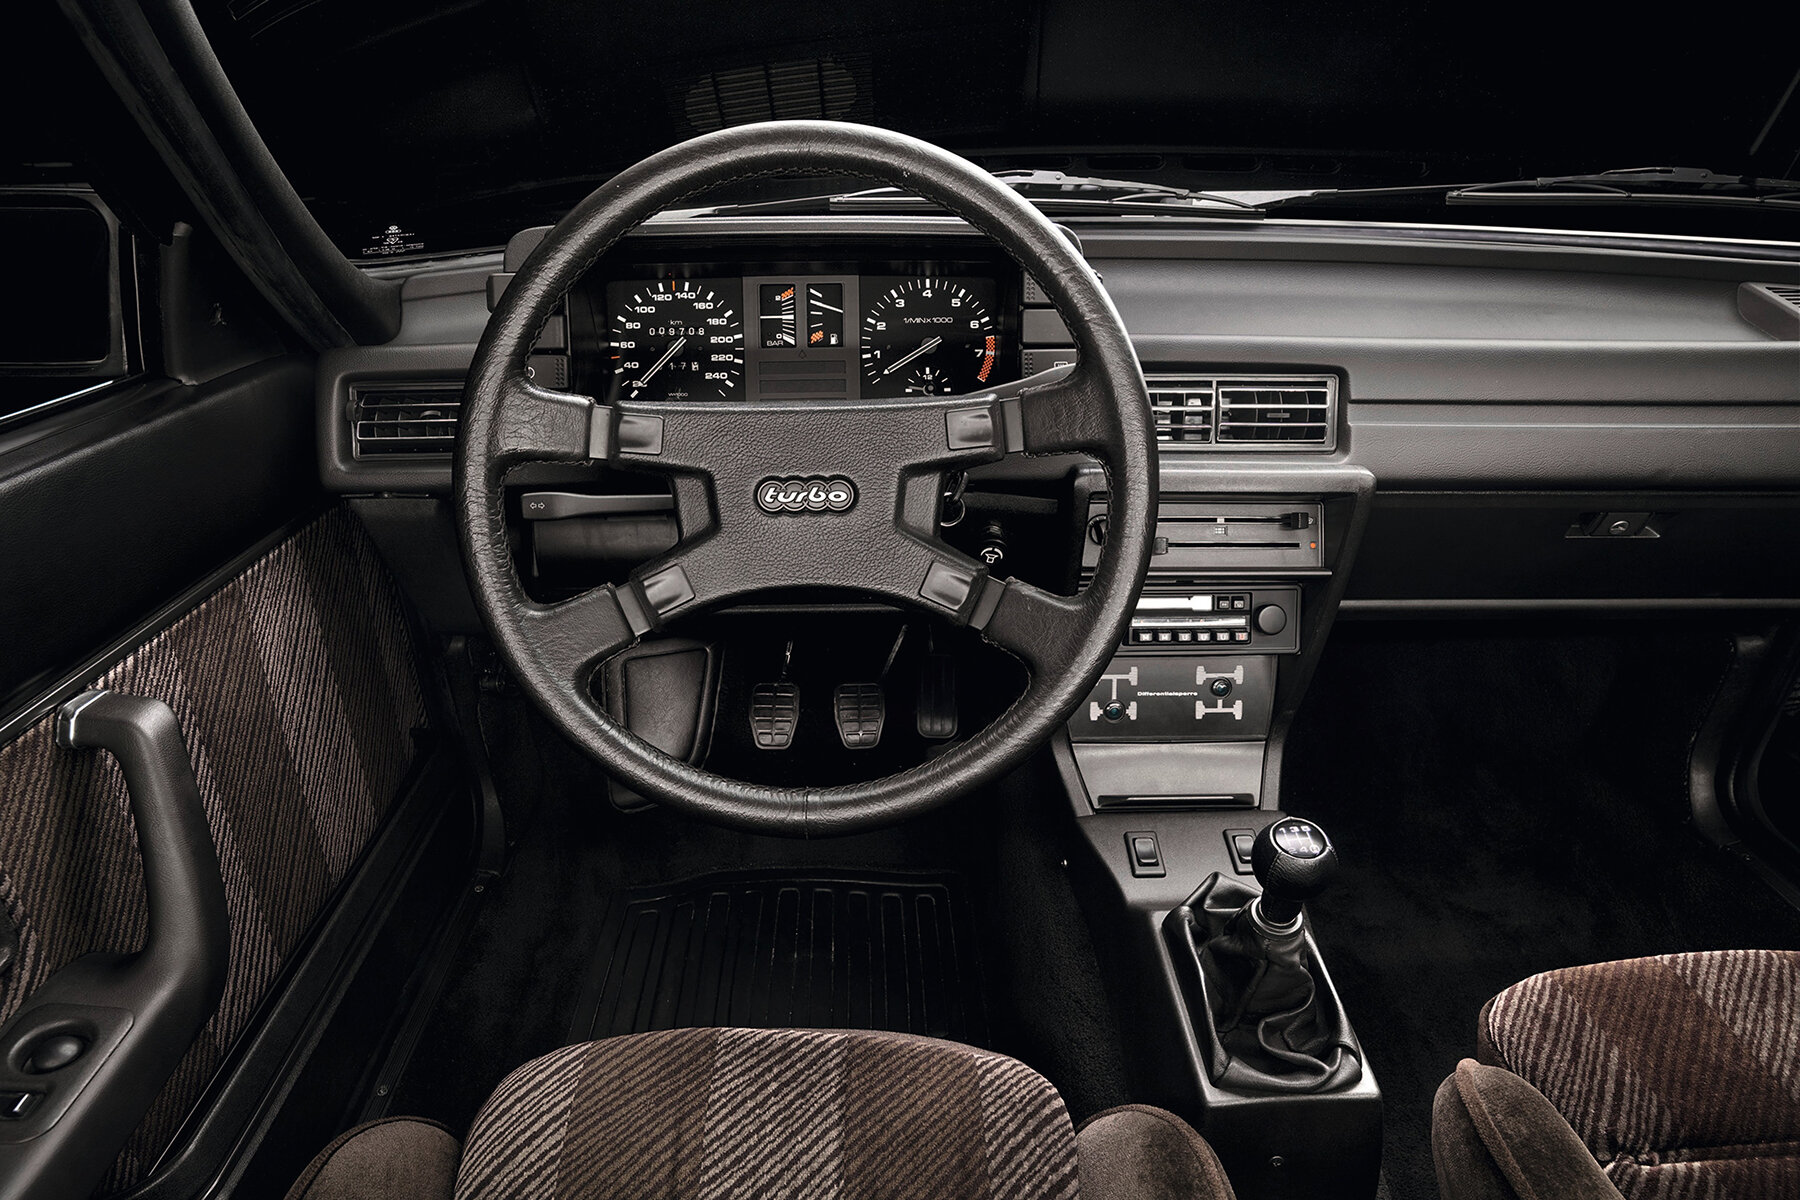 Audi Quattro (1980-1991): interior isn’t as high quality as some German cars of its era, and parts are hard to find